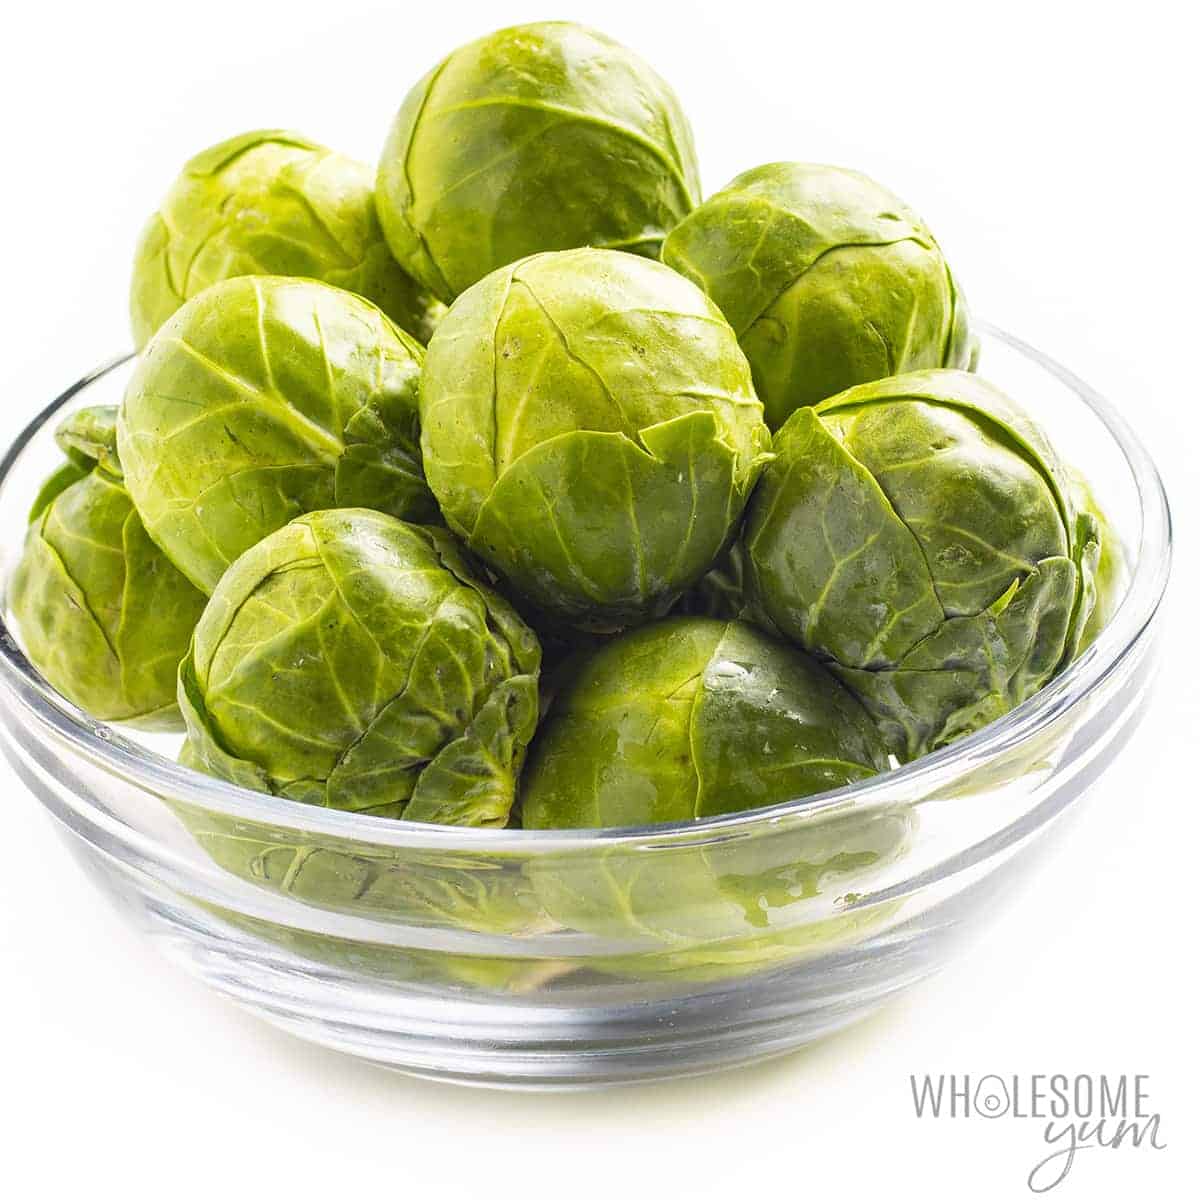 Are brussels sprouts keto? How low are carbs in brussel sprouts? This guide has all the answers, plus mouthwatering recipes.